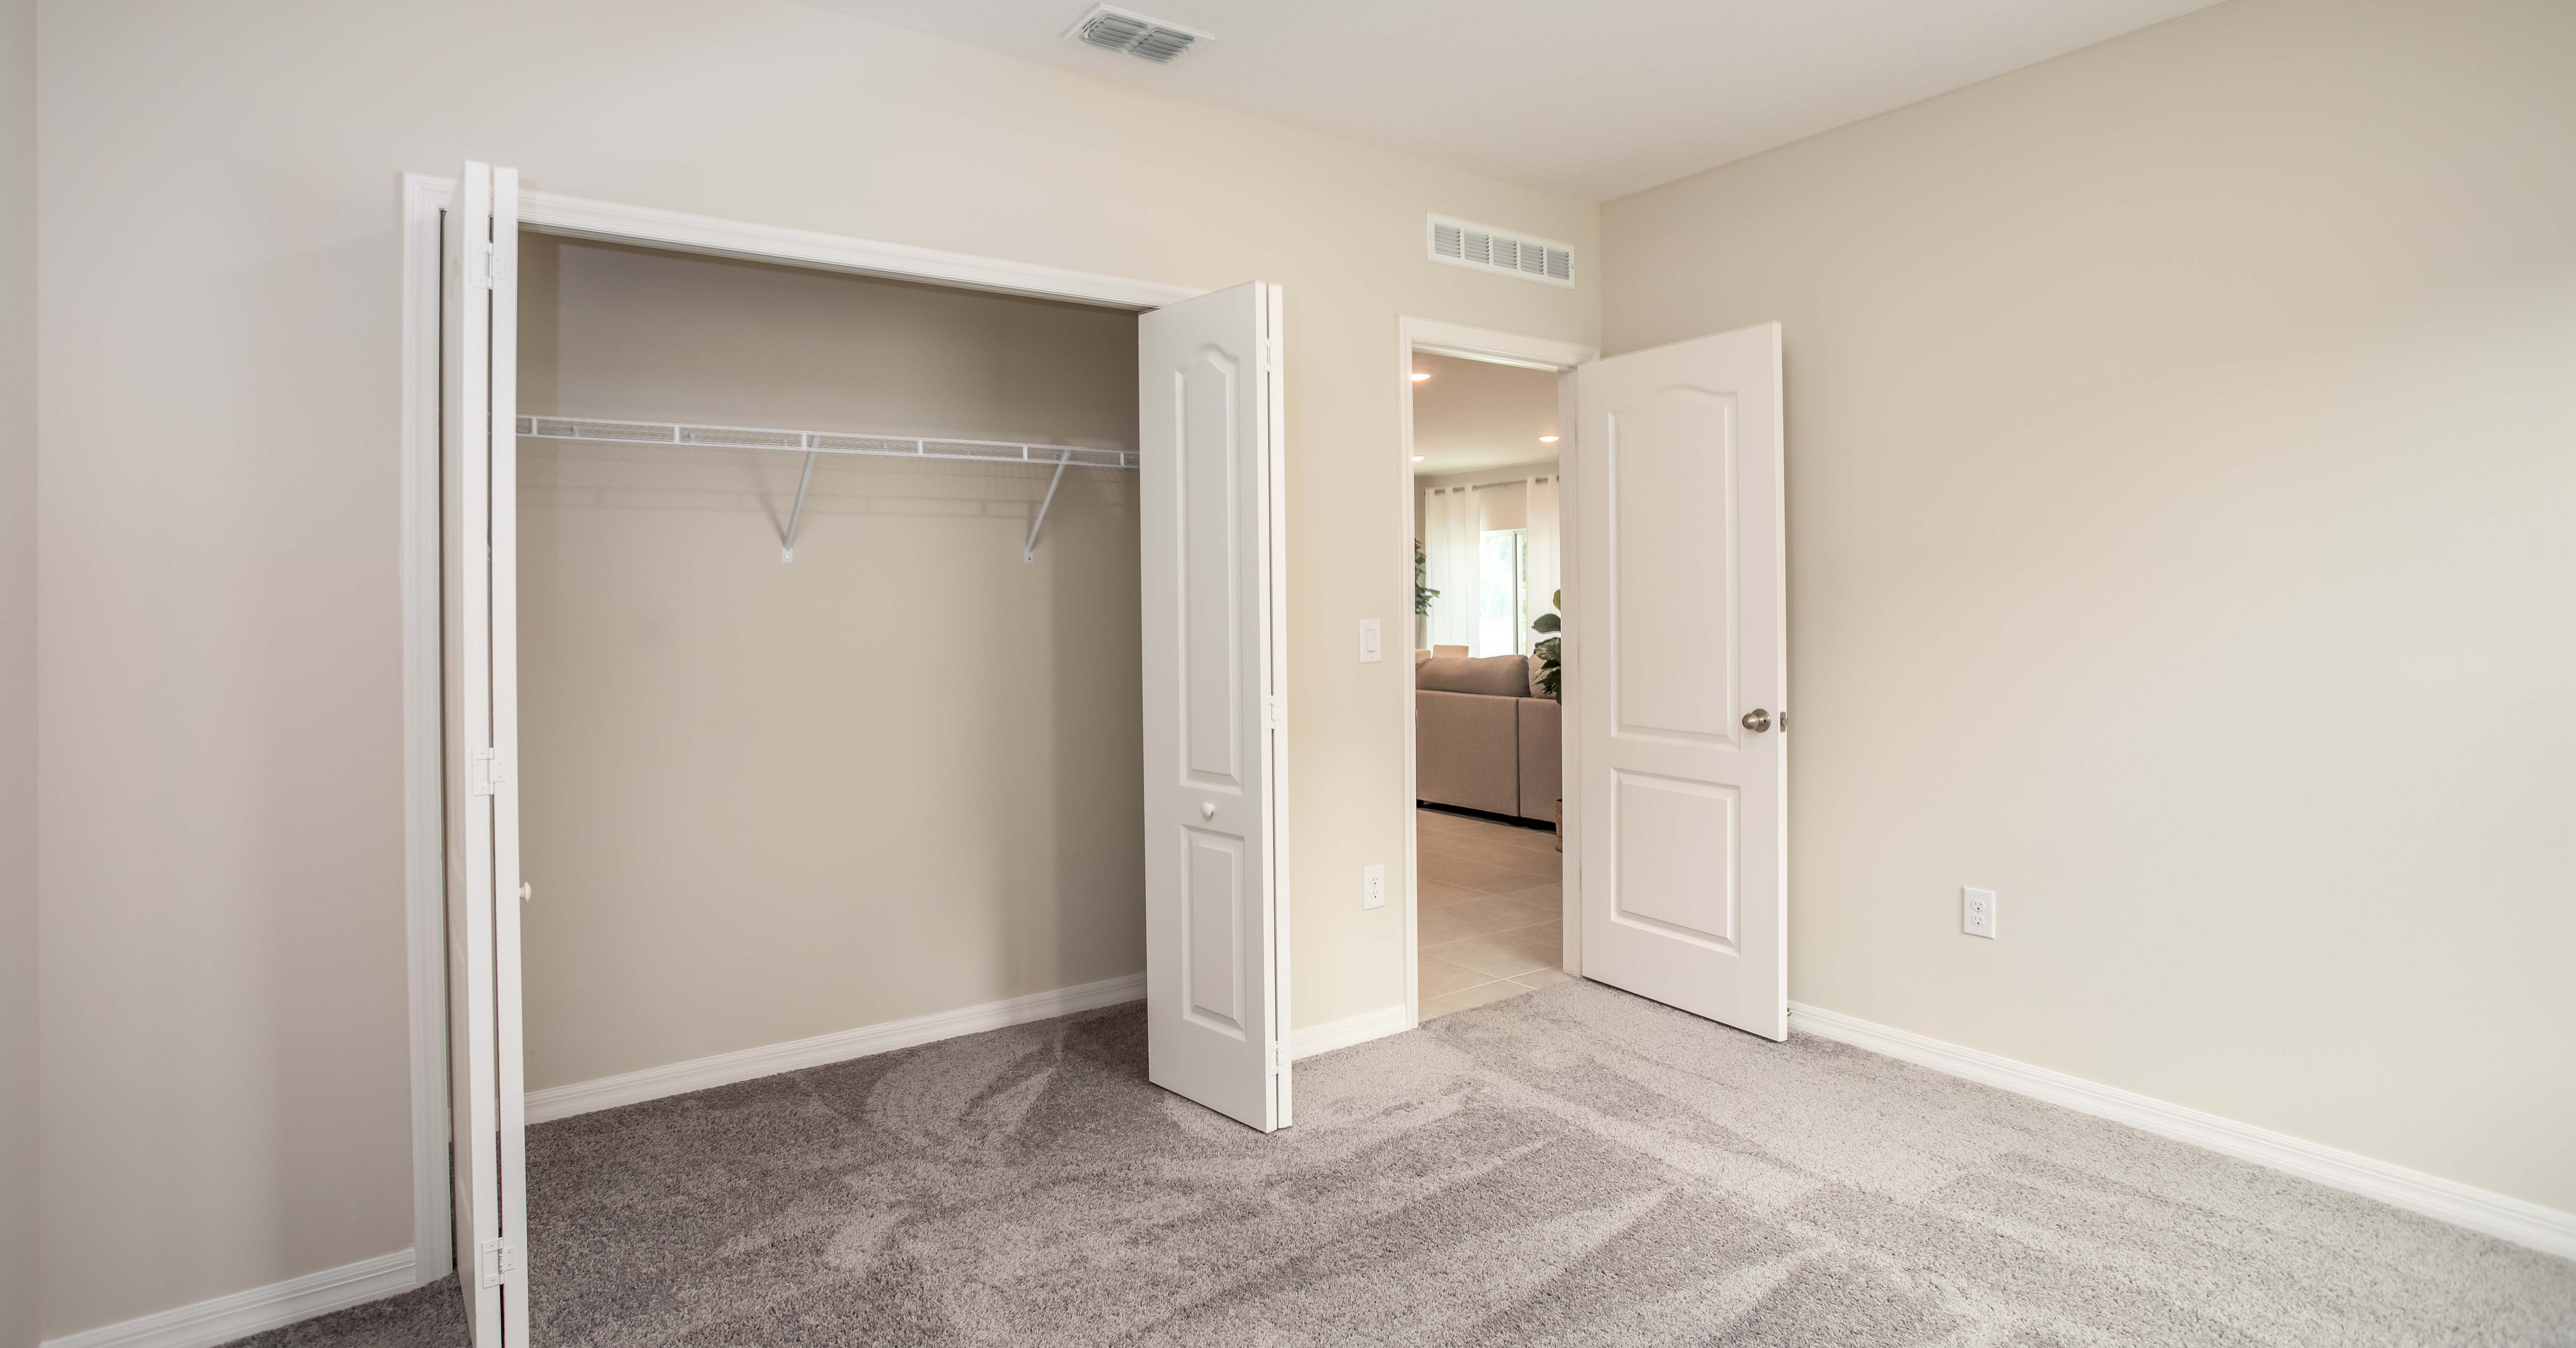 large closet in spare bedroom of new home for sale in ocala, fl